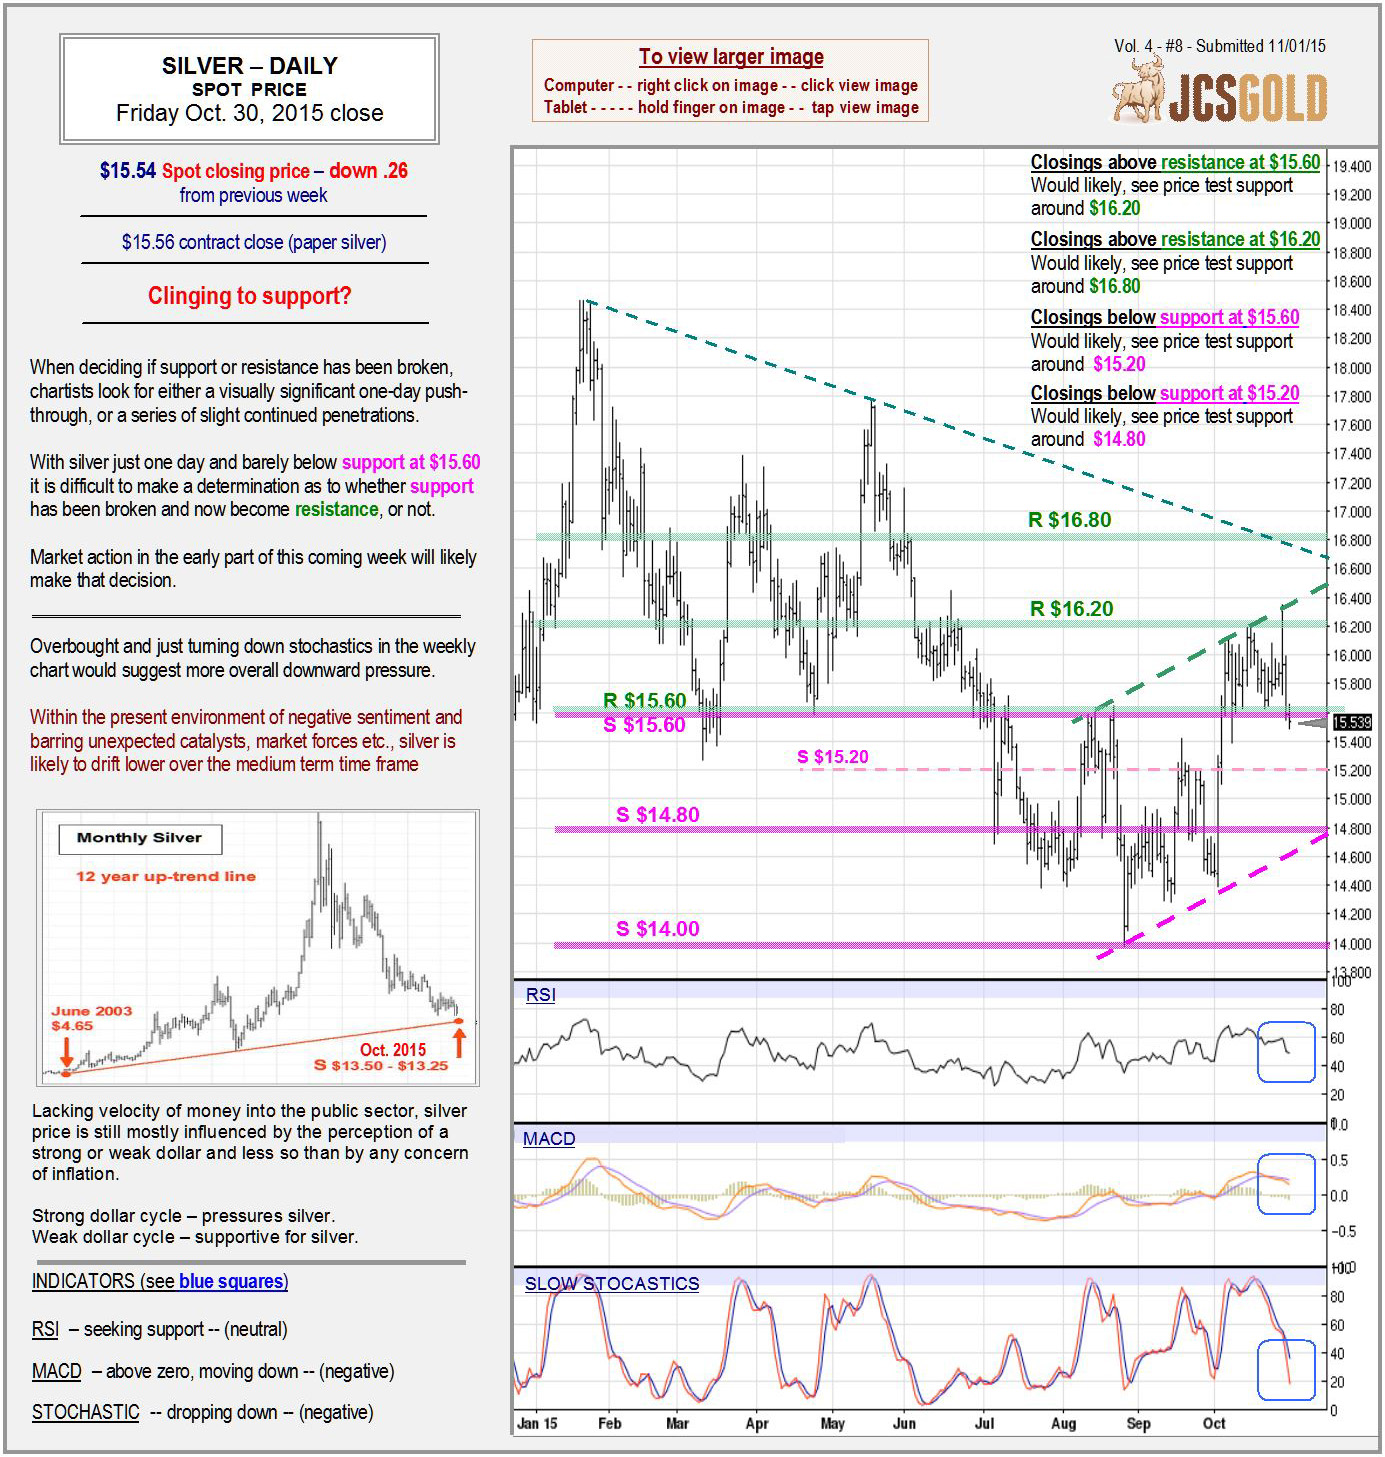 Oct 30, 2015 chart & commentary